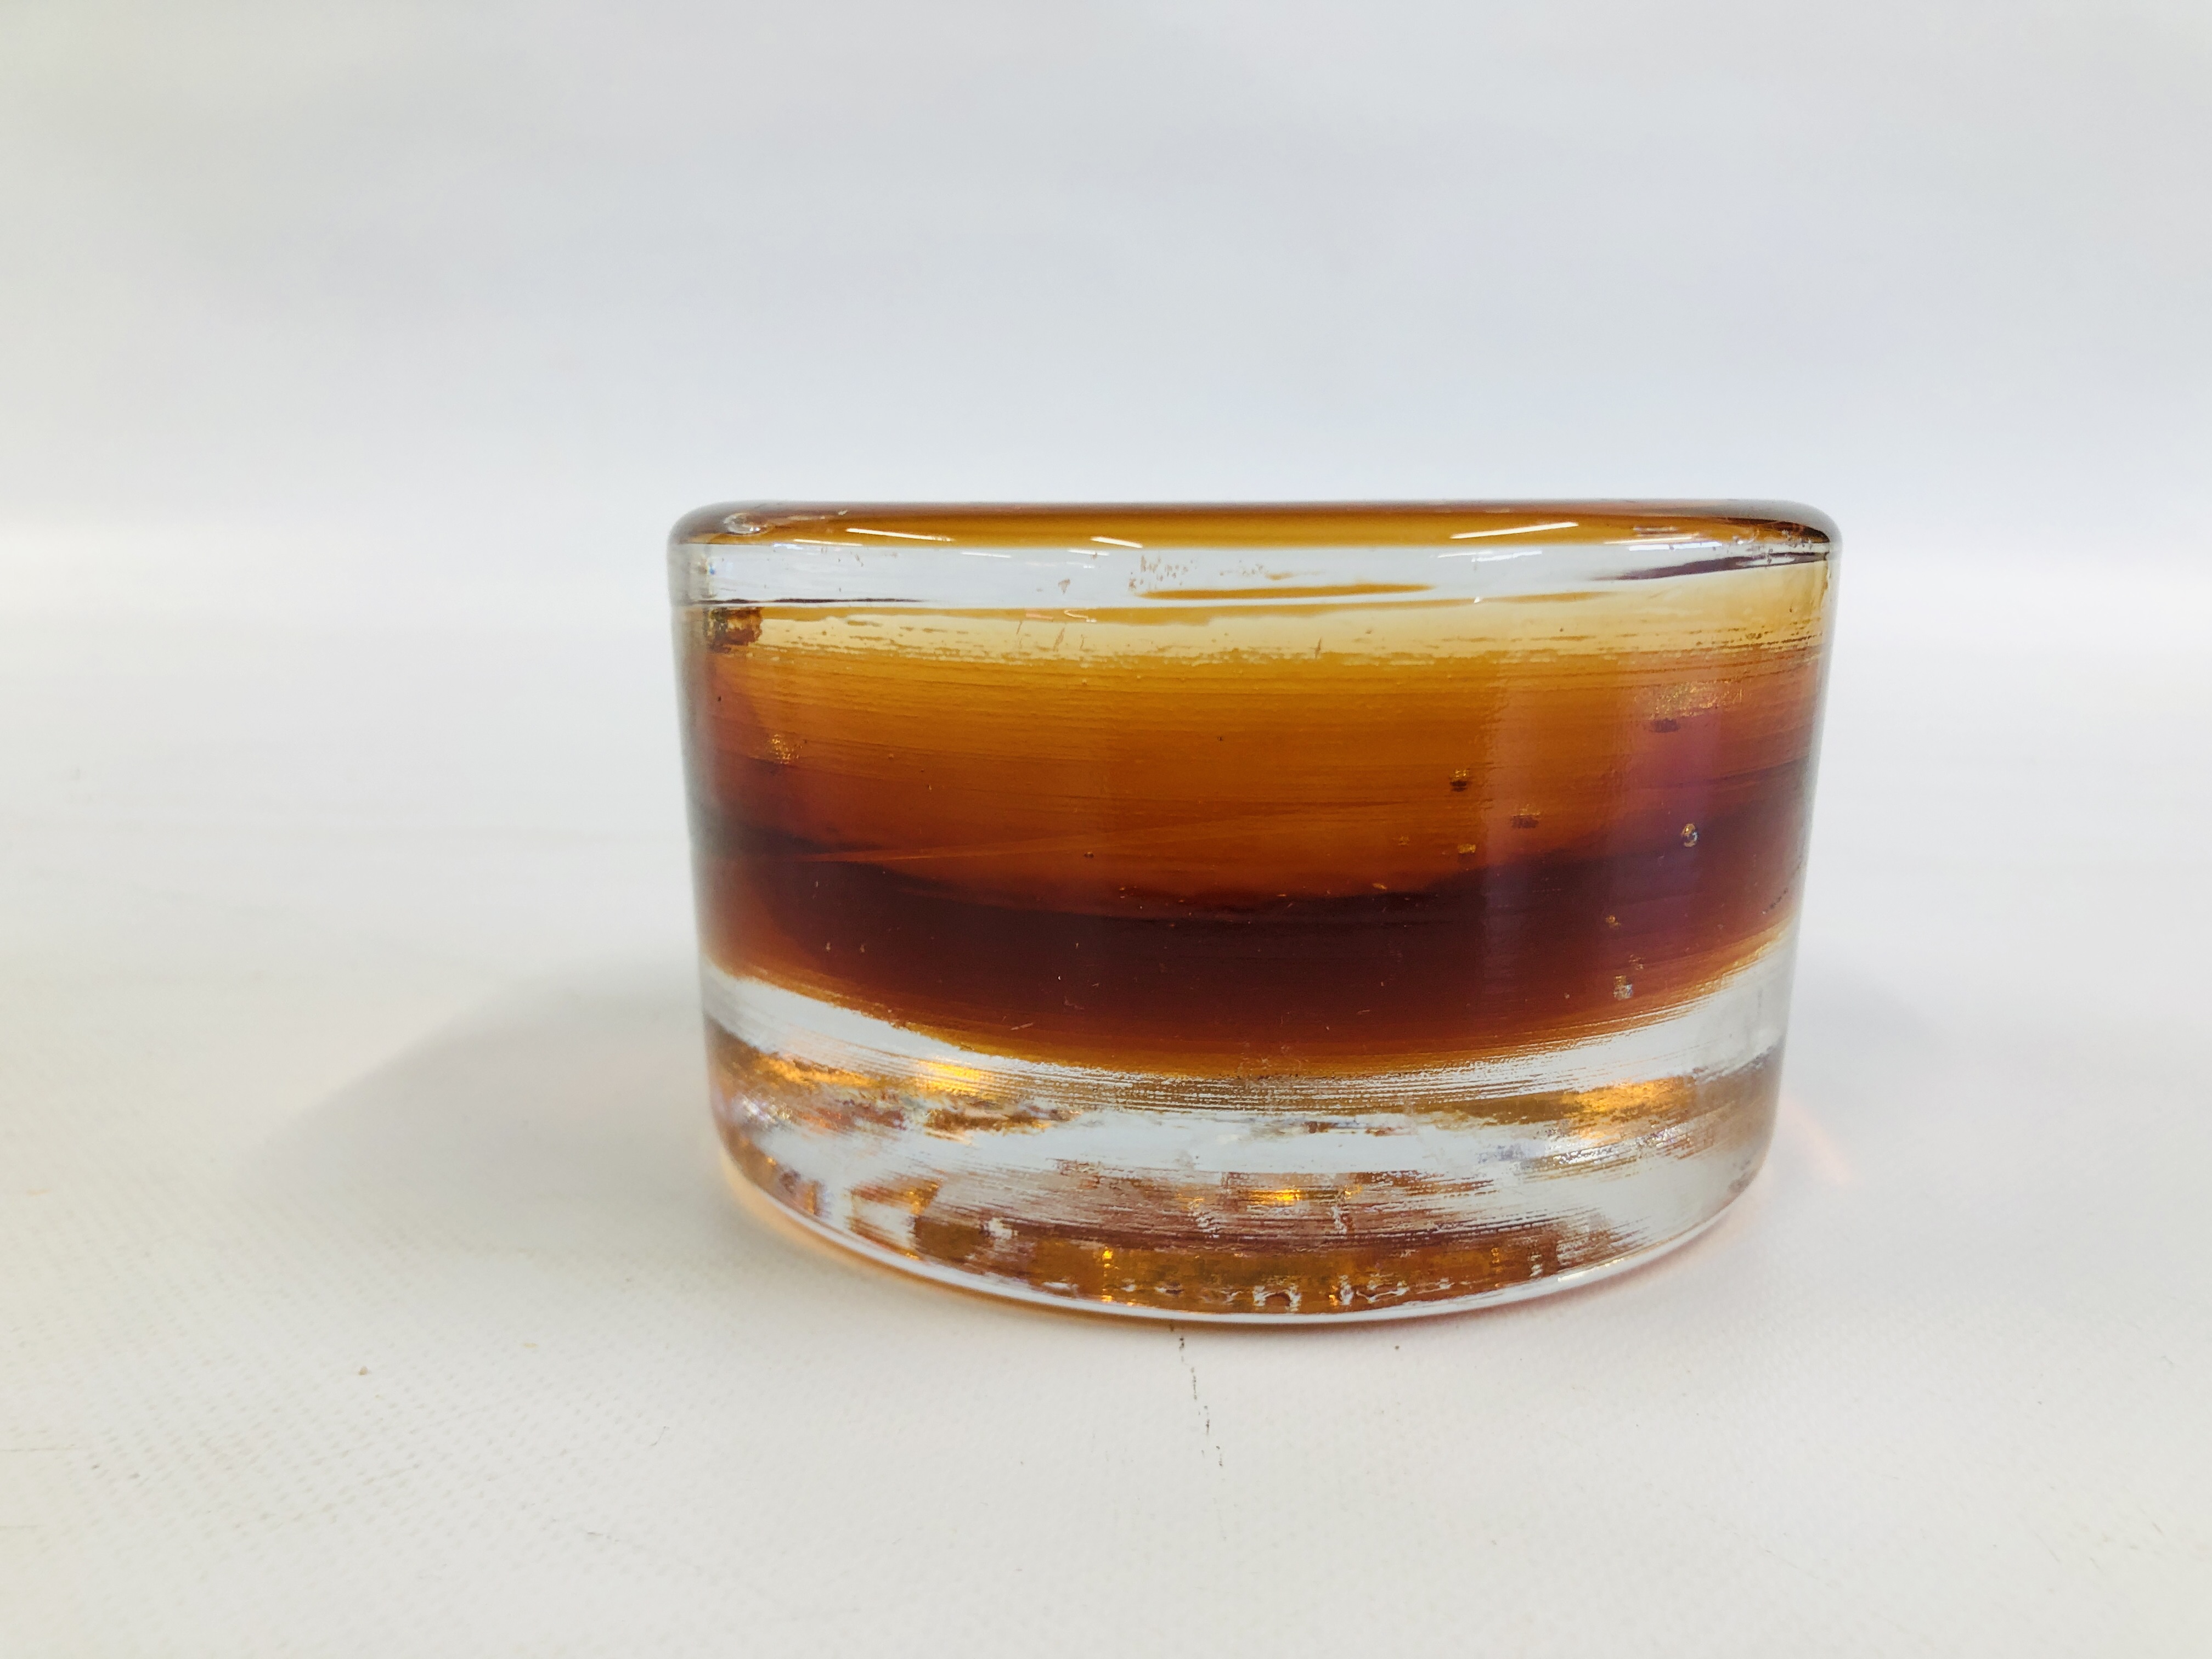 LARGE AMBER GLASS PAPERWEIGHT "MAYFLOWER 1620-1970" IN THE WEDGWOOD STYLE. - Image 2 of 3